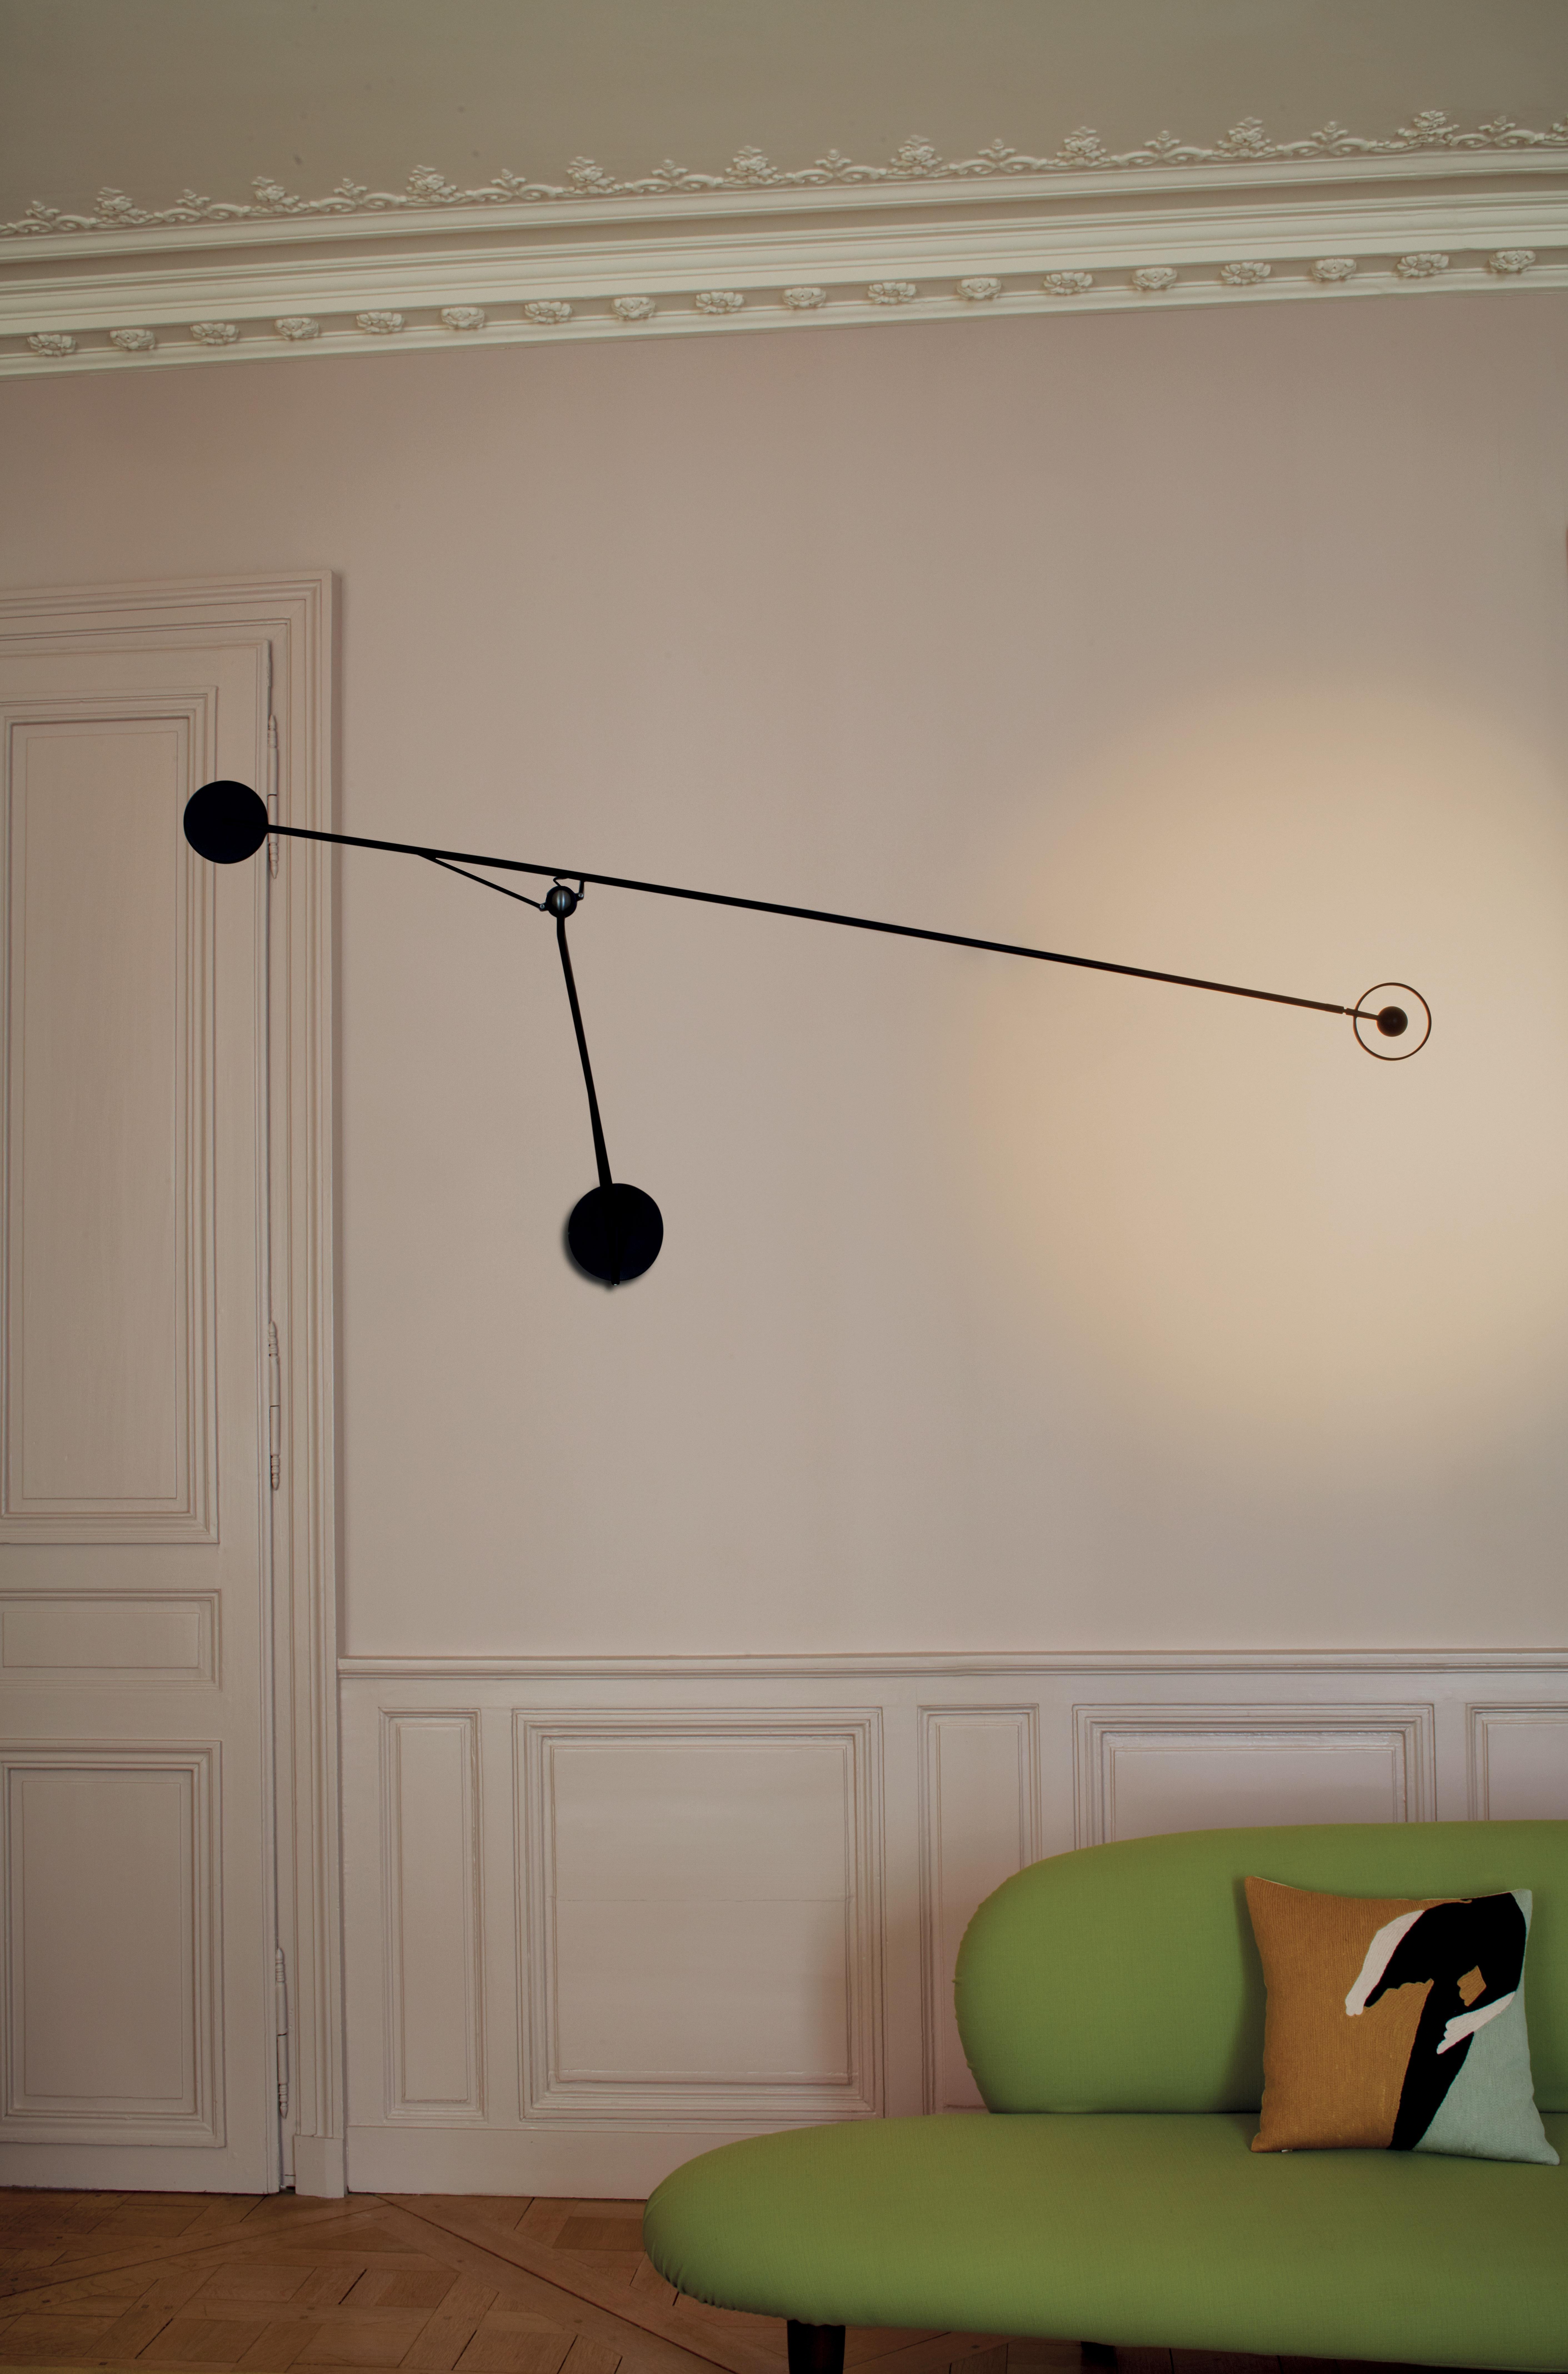 Aaro wall lamp by Simon Schmitz
Dimensions: D 16 x W 155 x H 64 cm
Materials: Aluminum, steel
All our lamps can be wired according to each country. If sold to the USA it will be wired for the USA for instance.

Wall lamp in steel and aluminium.